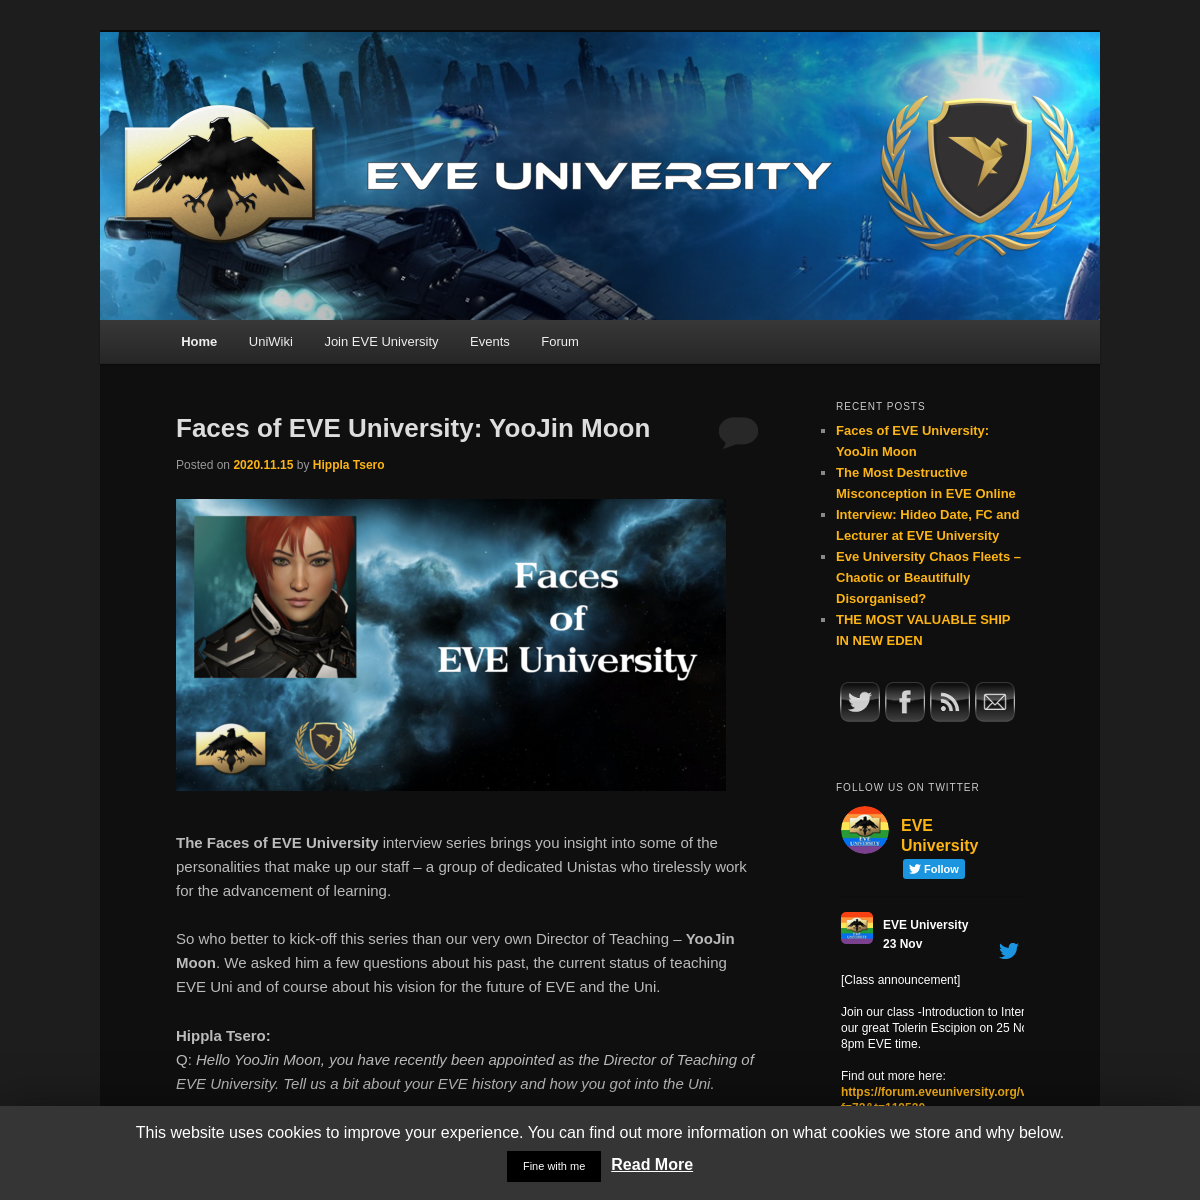 A complete backup of eveuniversity.org